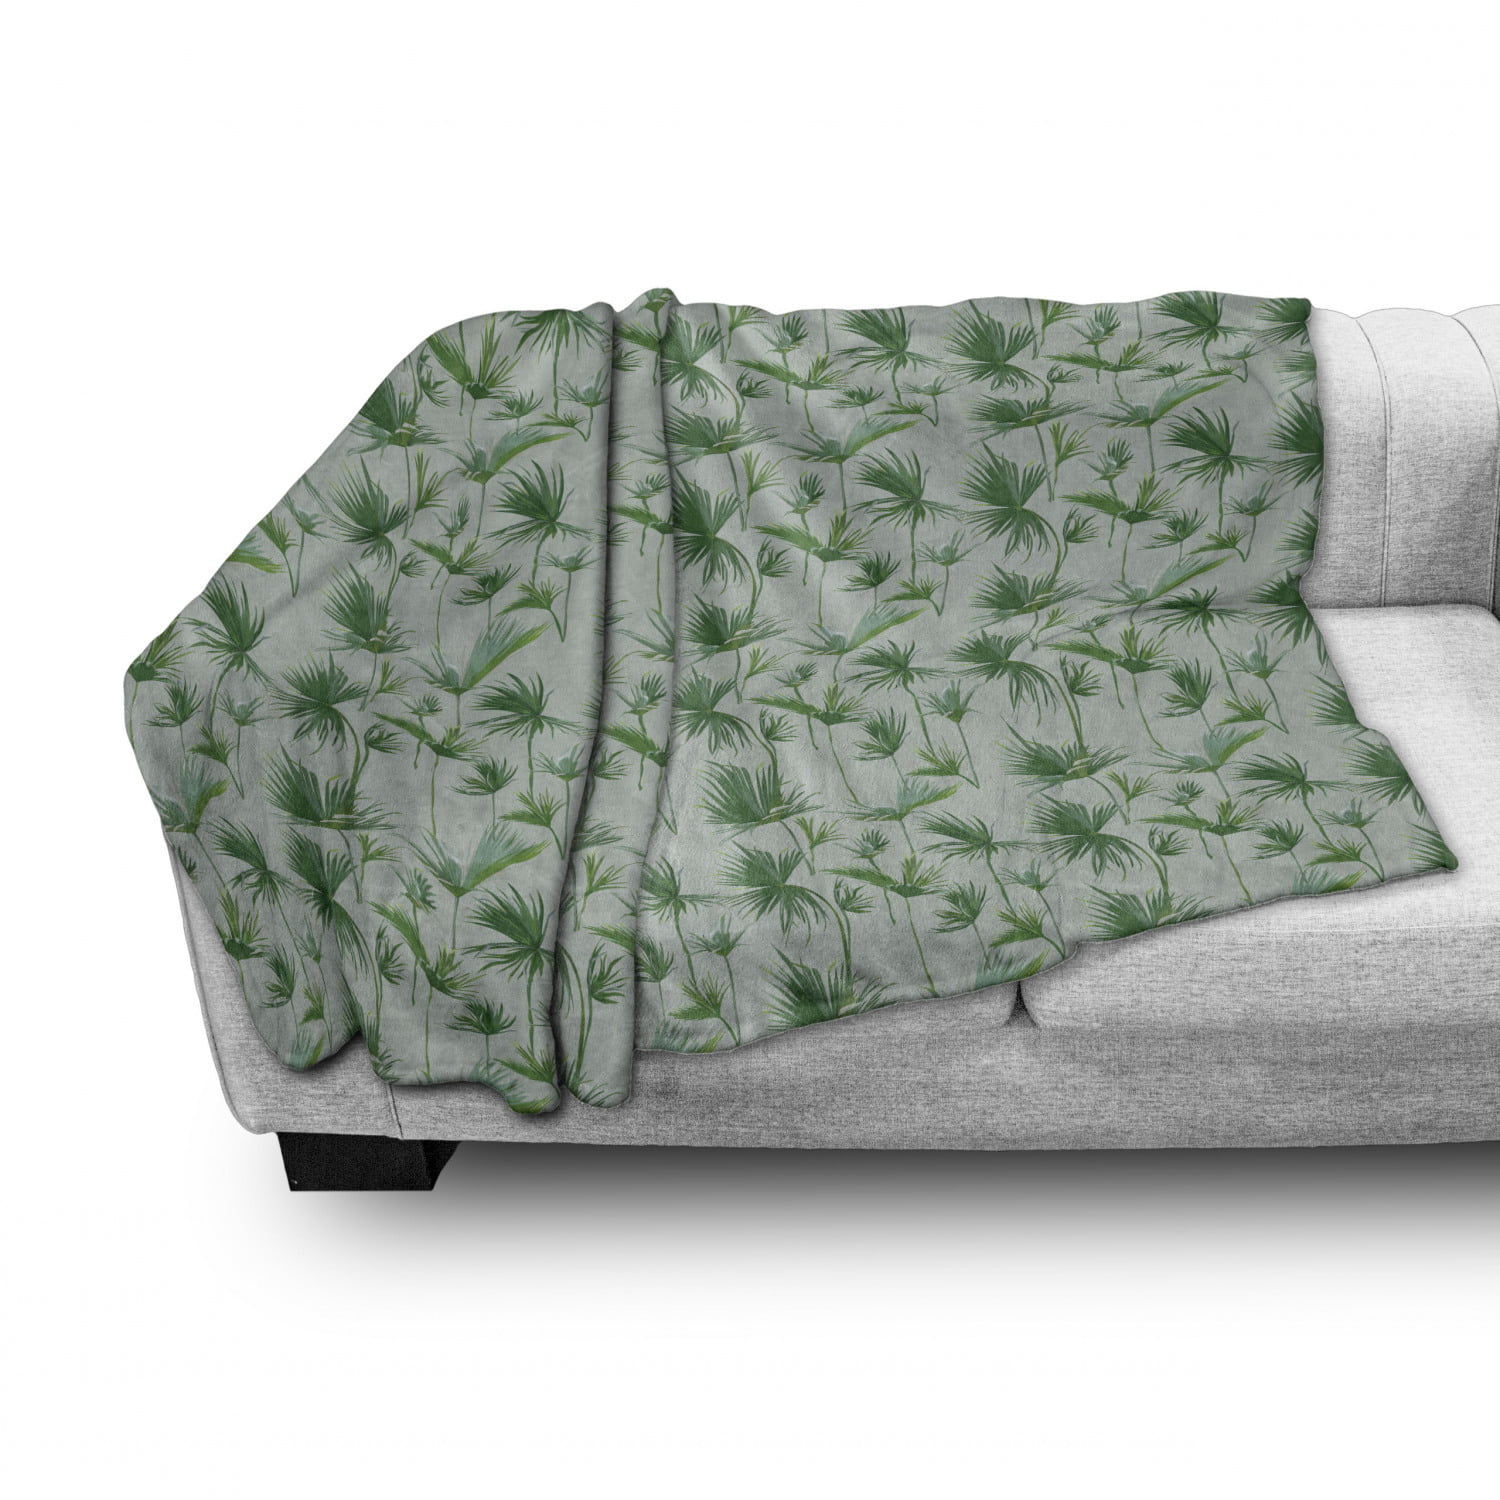 50 x 70 Laurel Green Fern Green Print of Vertically Scattered Palm Leaves Hawaiian Vibes Ambesonne Exotic Soft Flannel Fleece Throw Blanket Cozy Plush for Indoor and Outdoor Use 